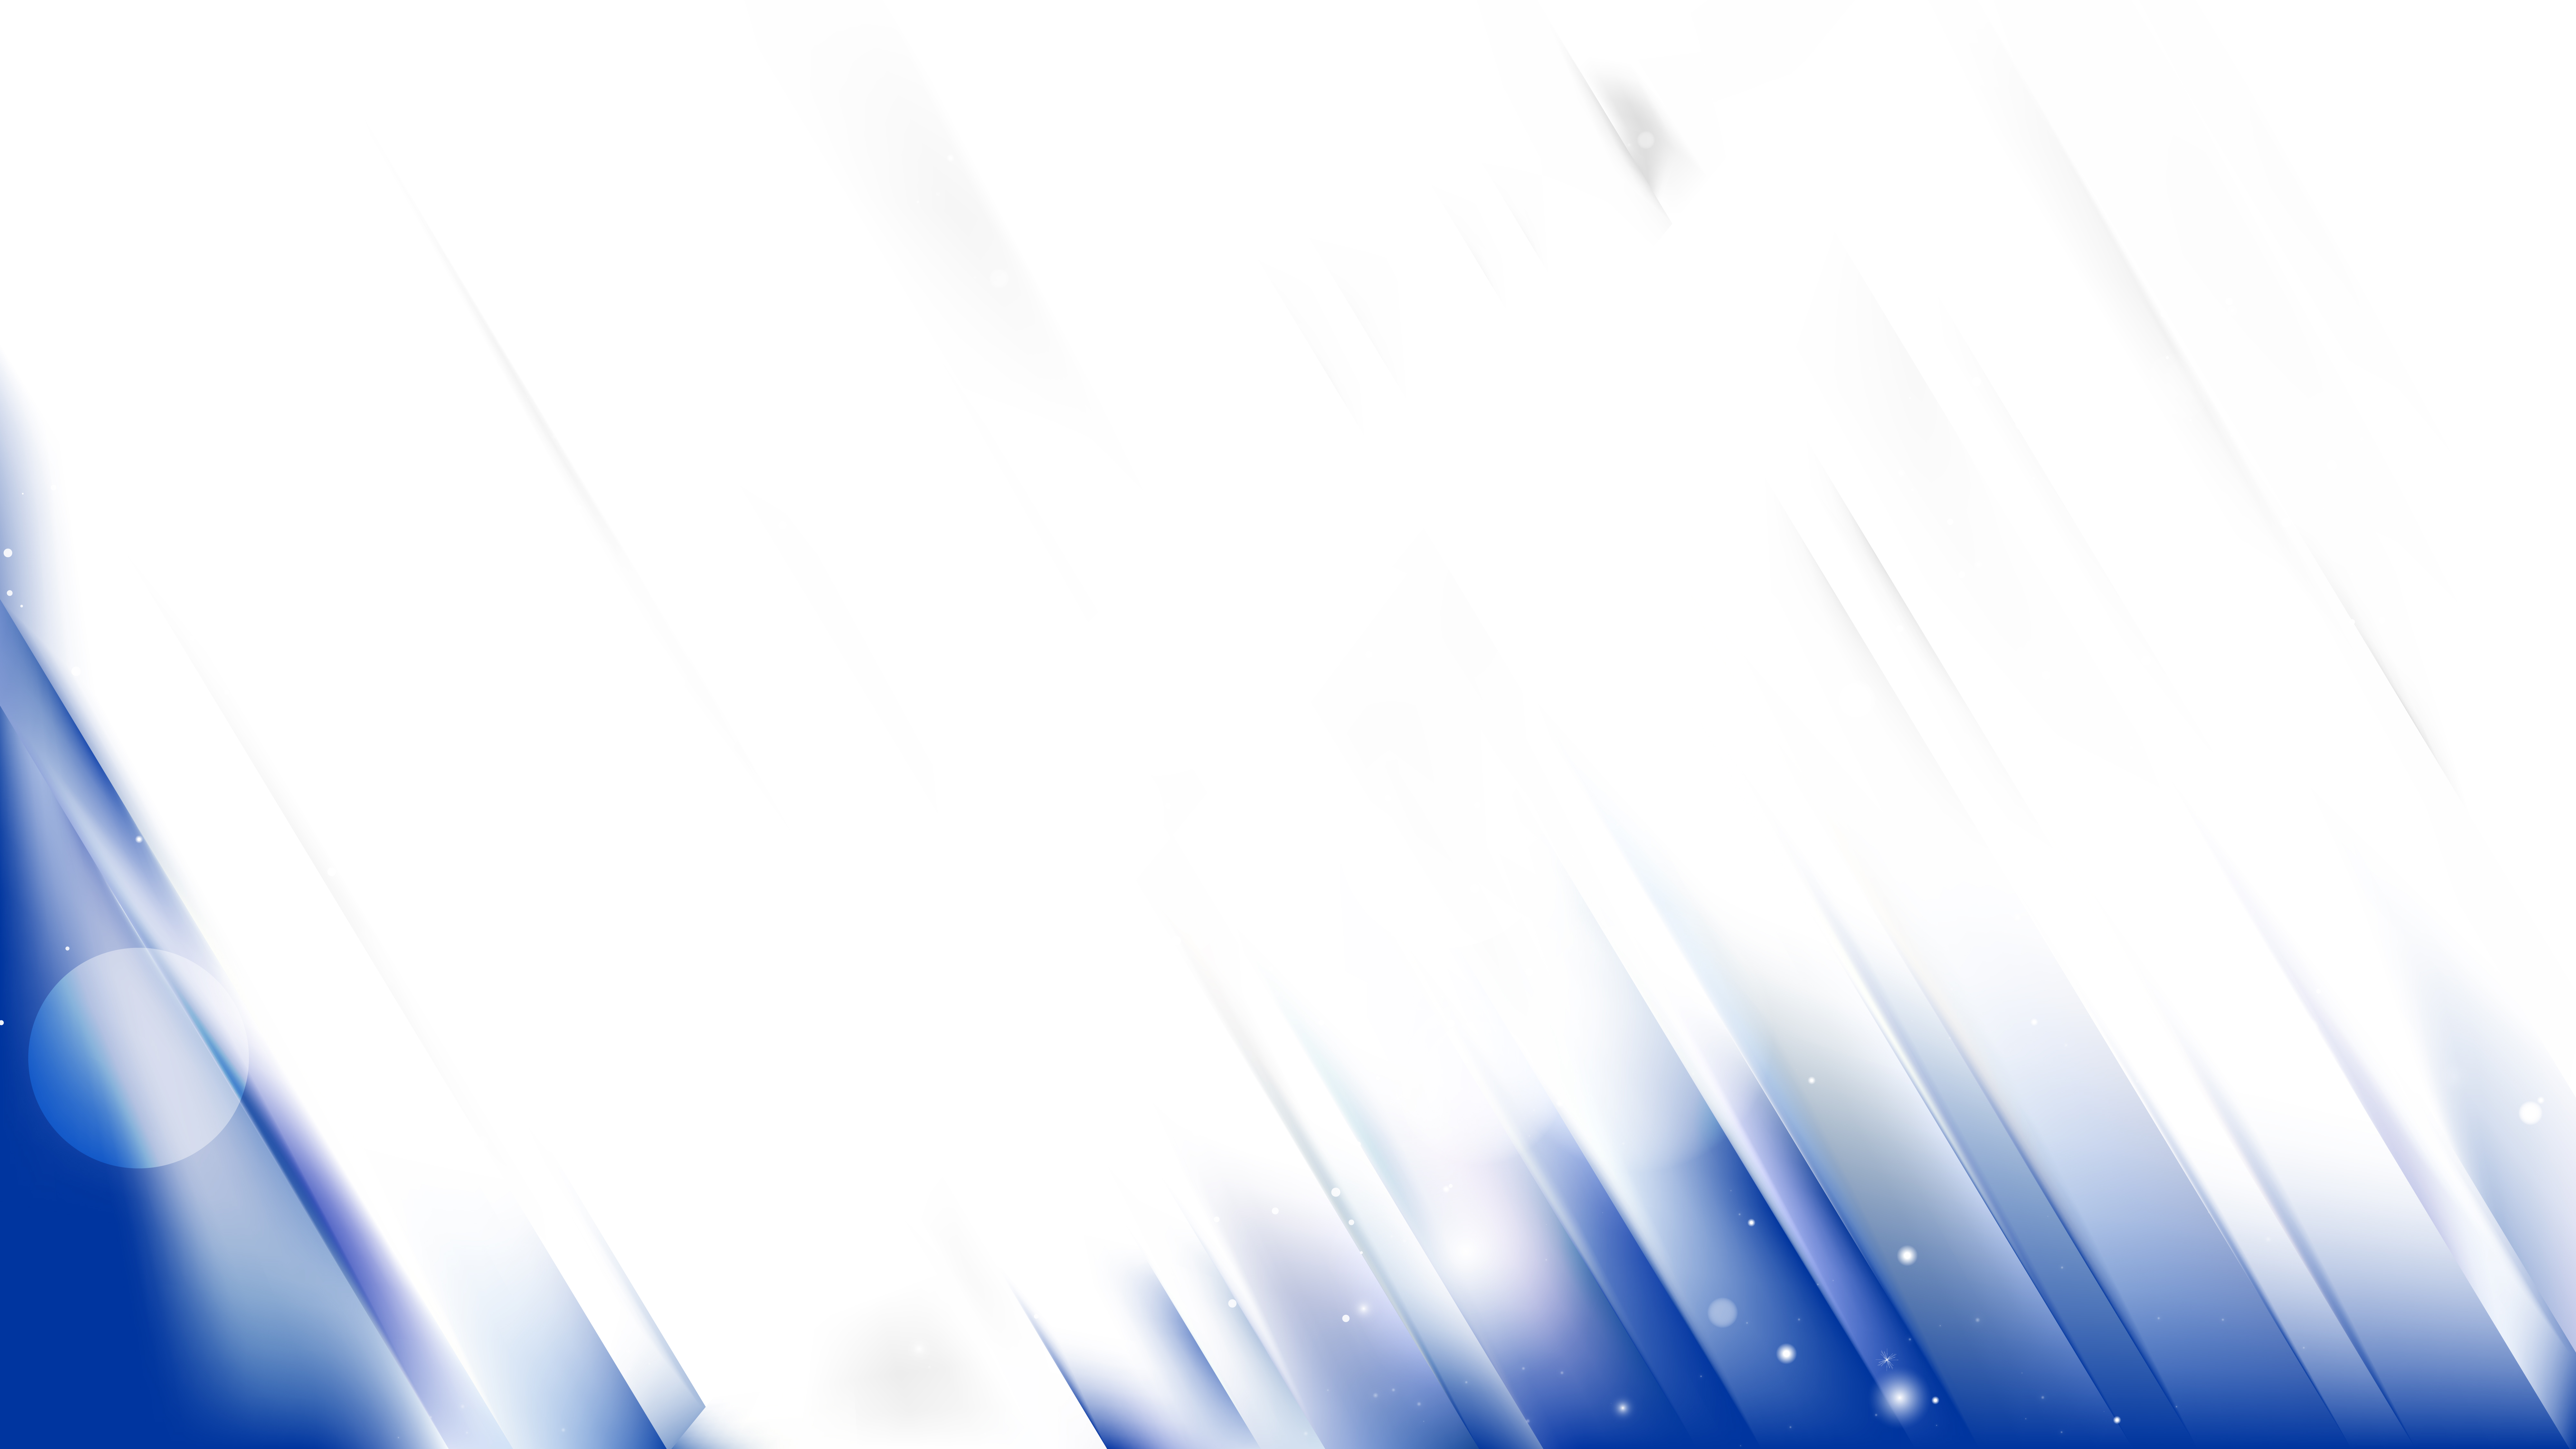 Free Blue and White Abstract Background Illustration